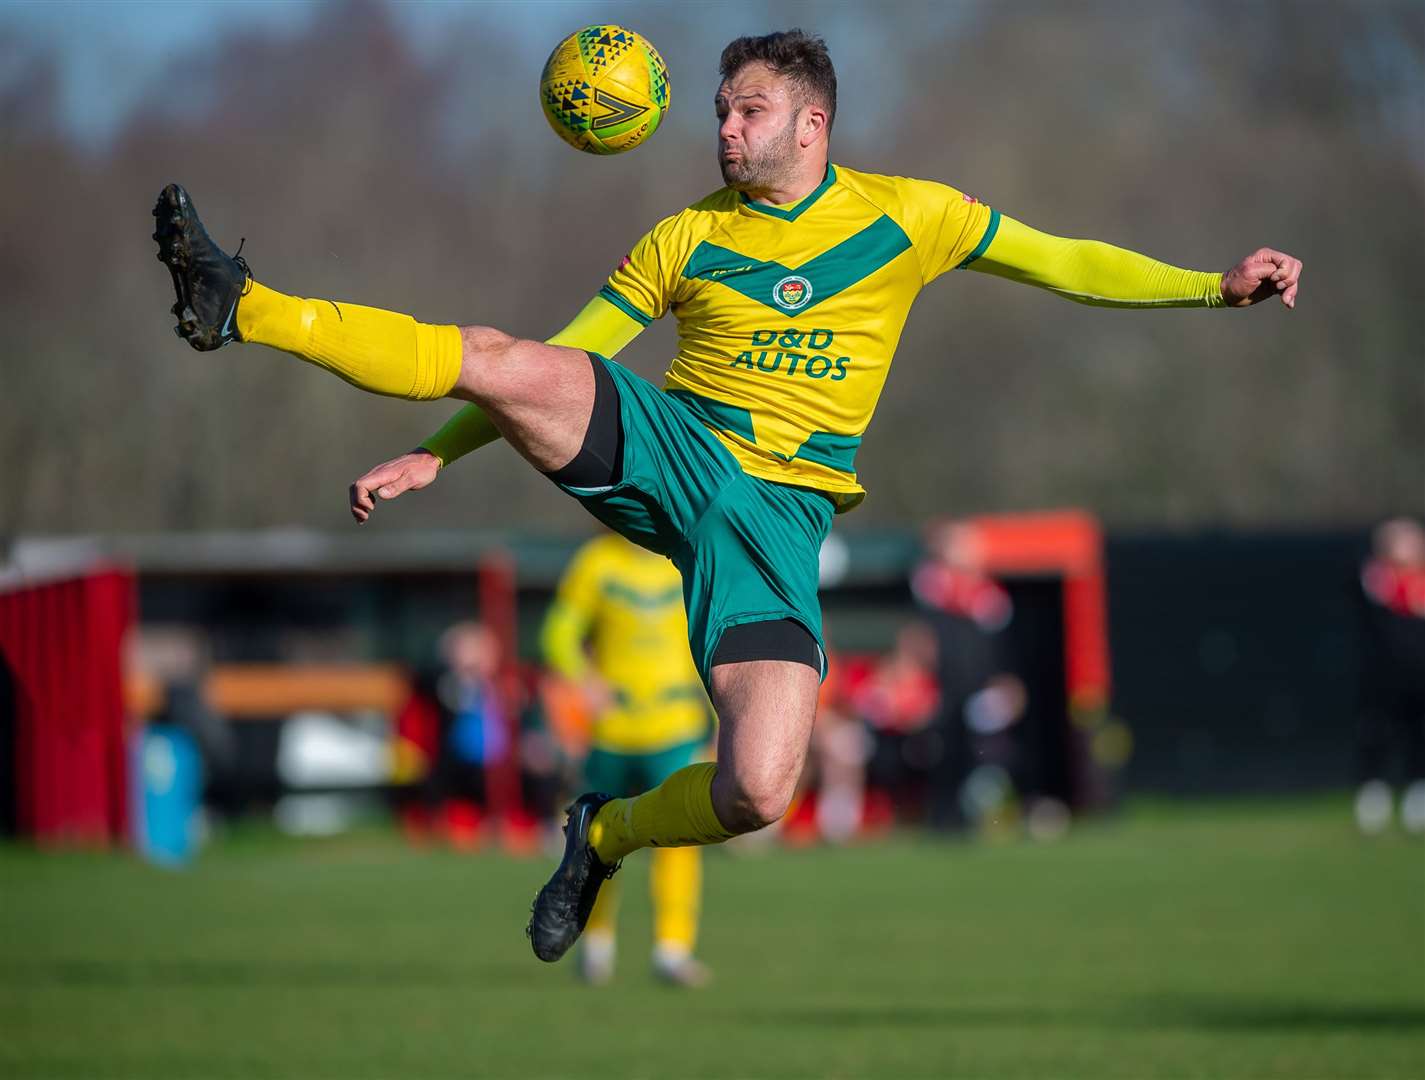 Gary Lockyer in action during Ashford's 1-1 draw at Sittingbourne Picture: Ian Scammell